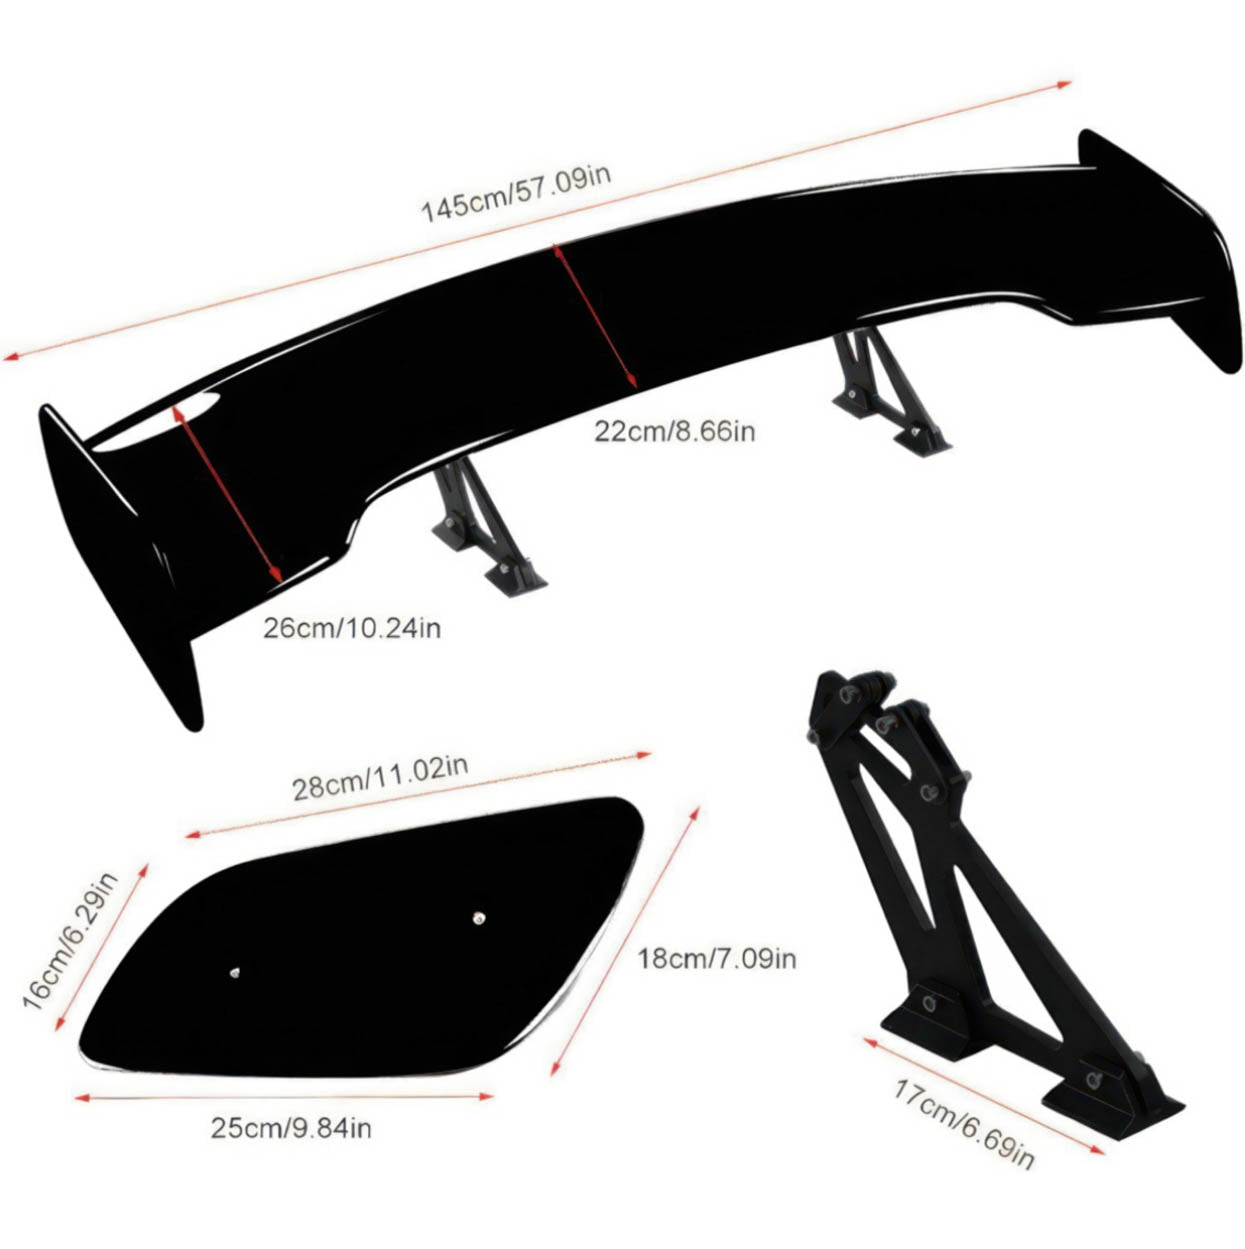 Universal GT Style Wing Spoiler 57'' | GT Style Rear Wing | Gloss Black